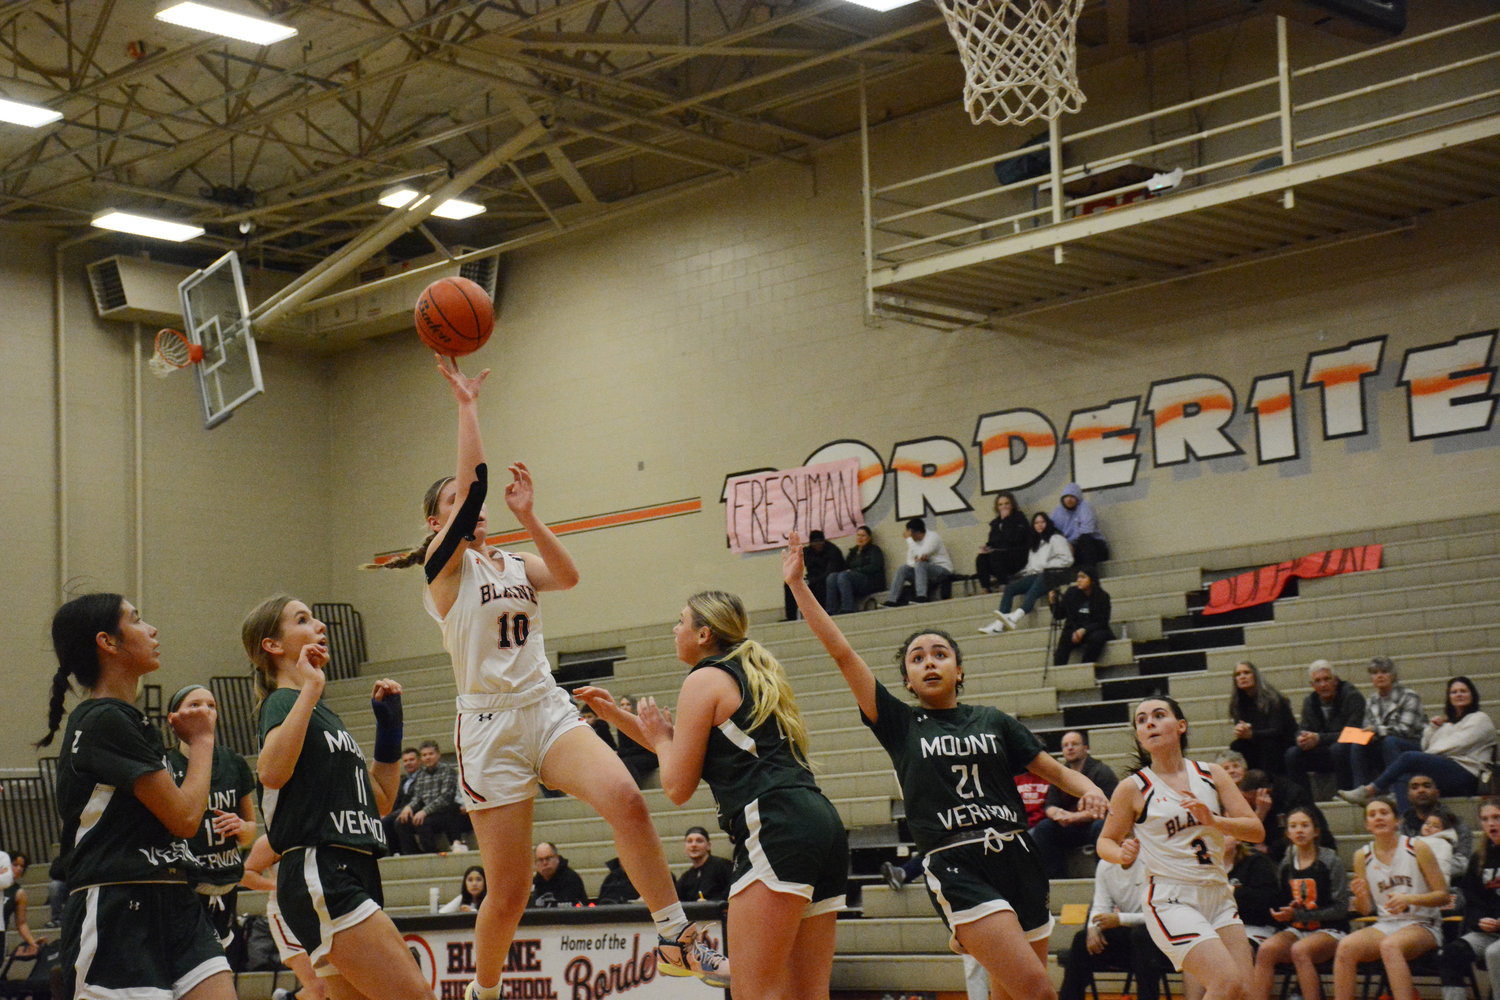 Jordyn Vezzetti takes a running jump shot in Blaine’s 63-40 loss to Mount Vernon January 23.